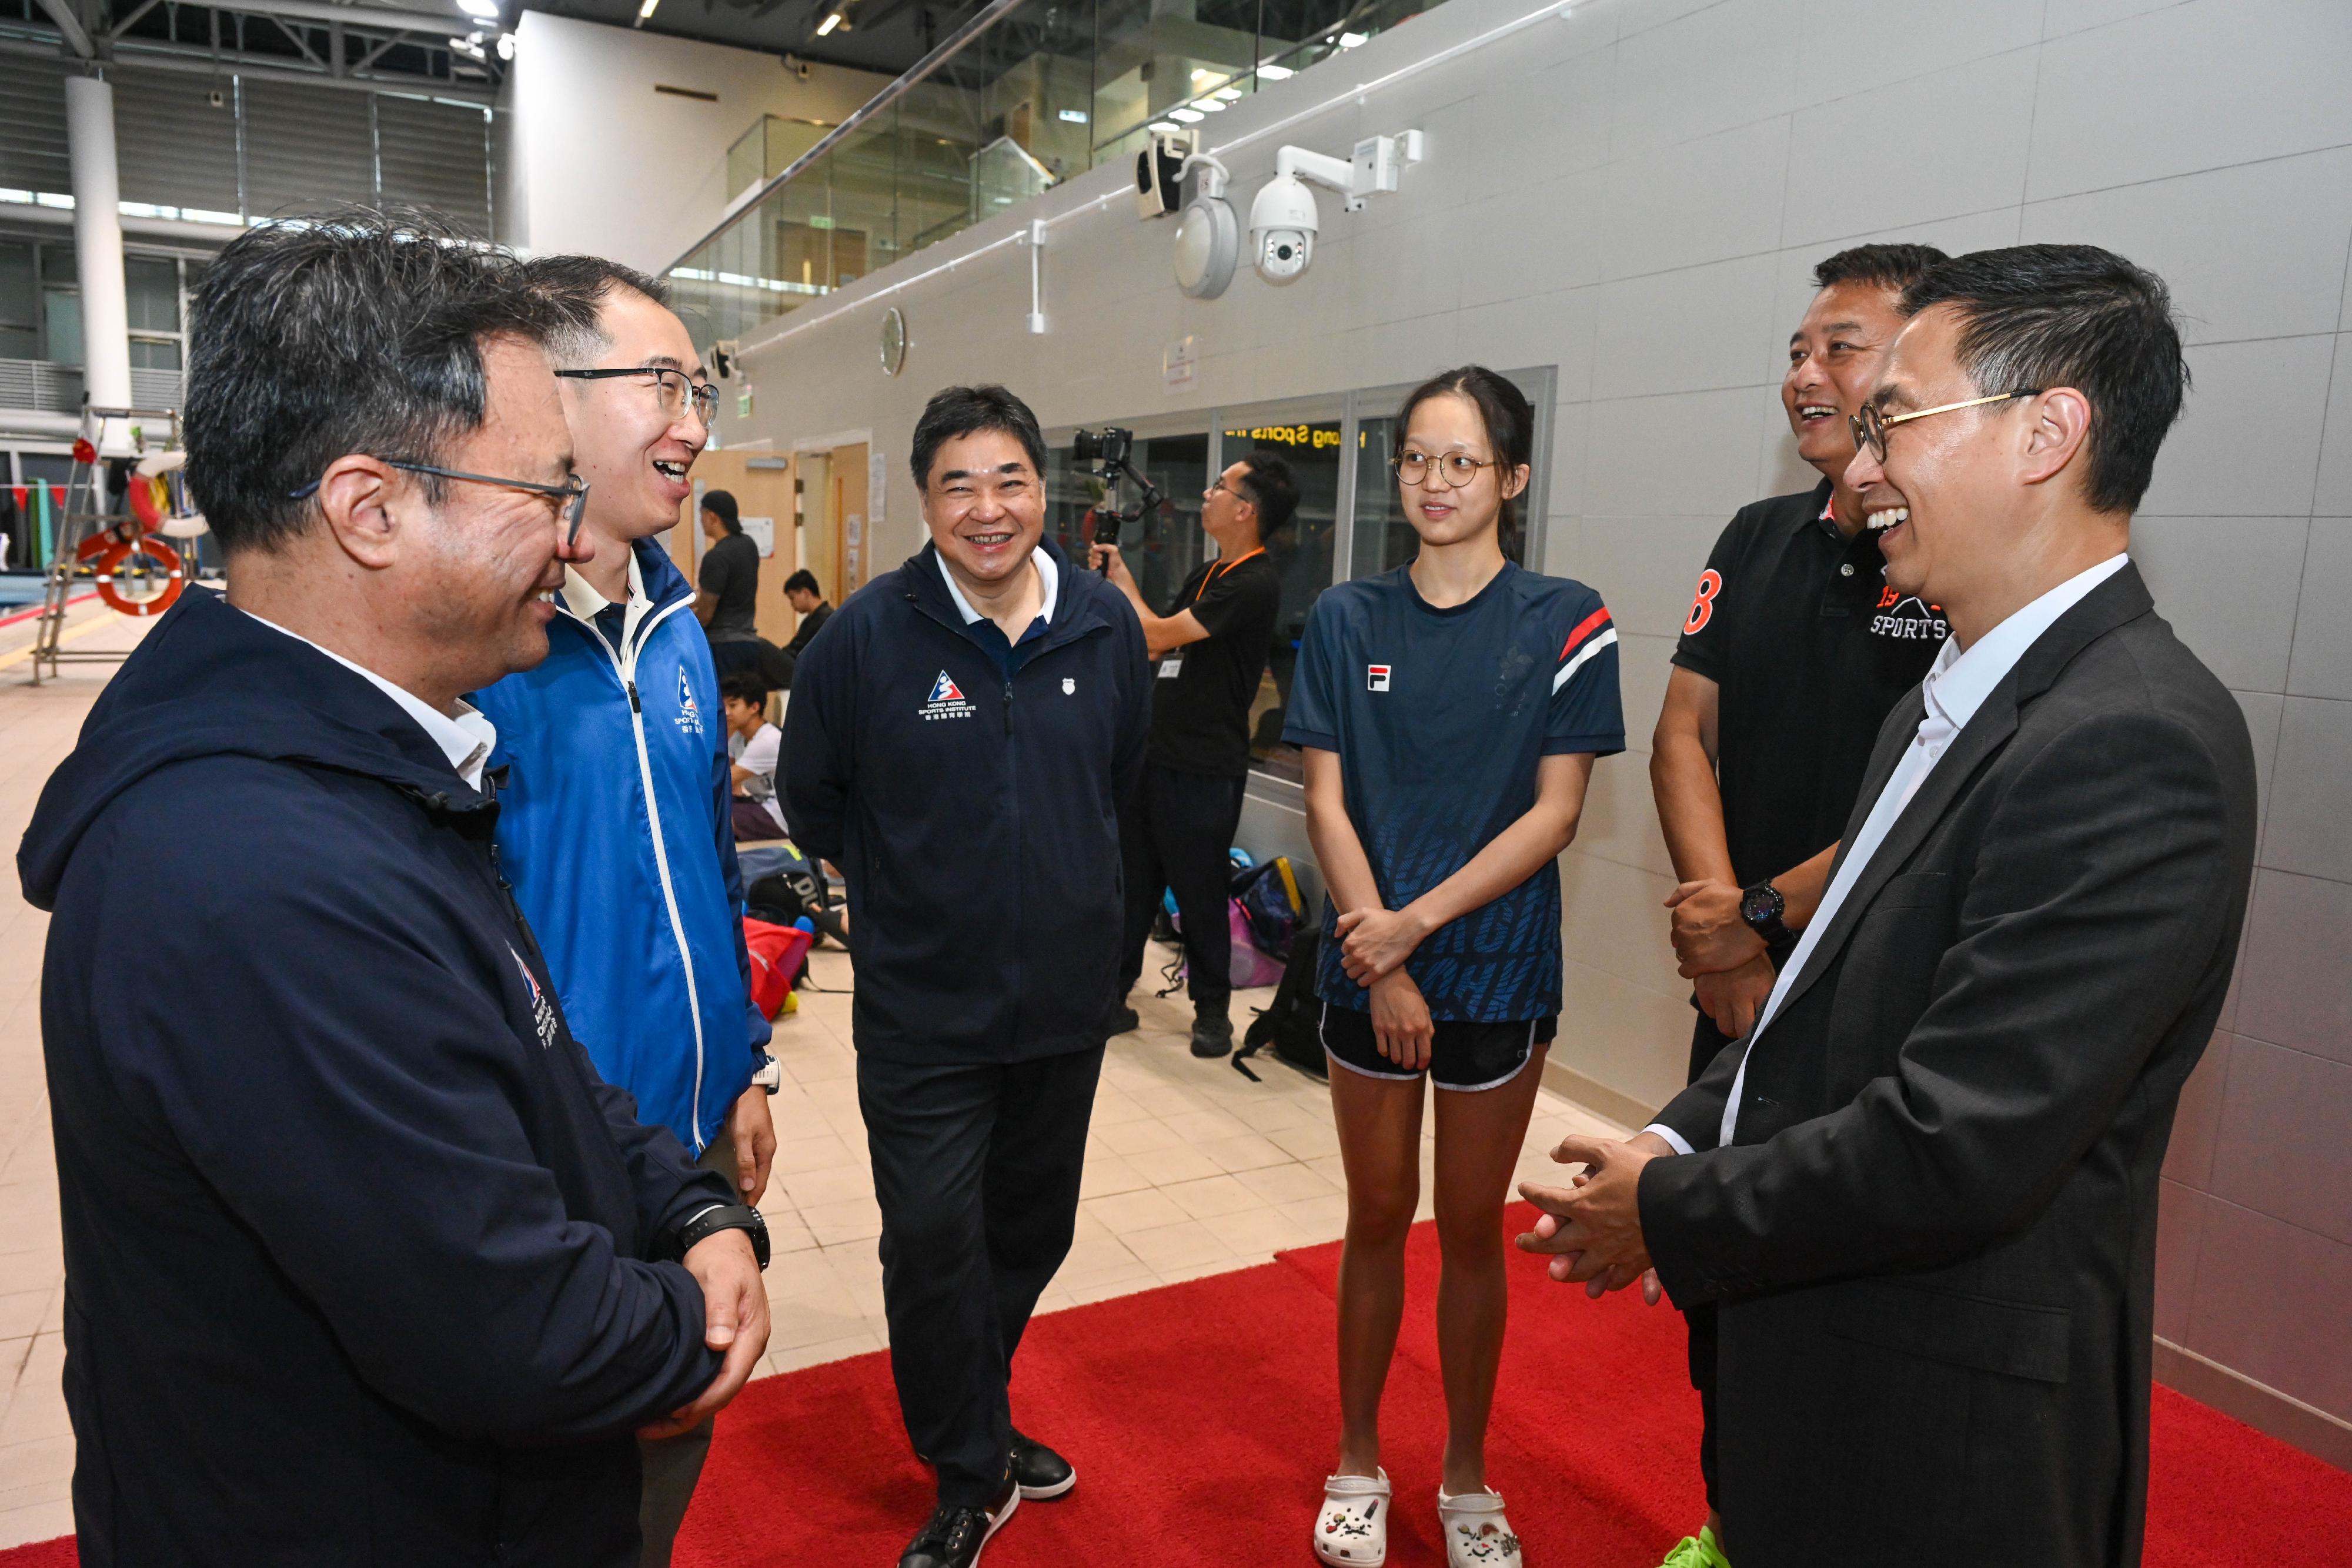 The Secretary for Culture, Sports and Tourism, Mr Kevin Yeung (first right), and the Commissioner for Sports, Mr Sam Wong, this afternoon (May 27) visit the swimming pool in the Hong Kong Sports Institute to exchange with the swimming athletes.